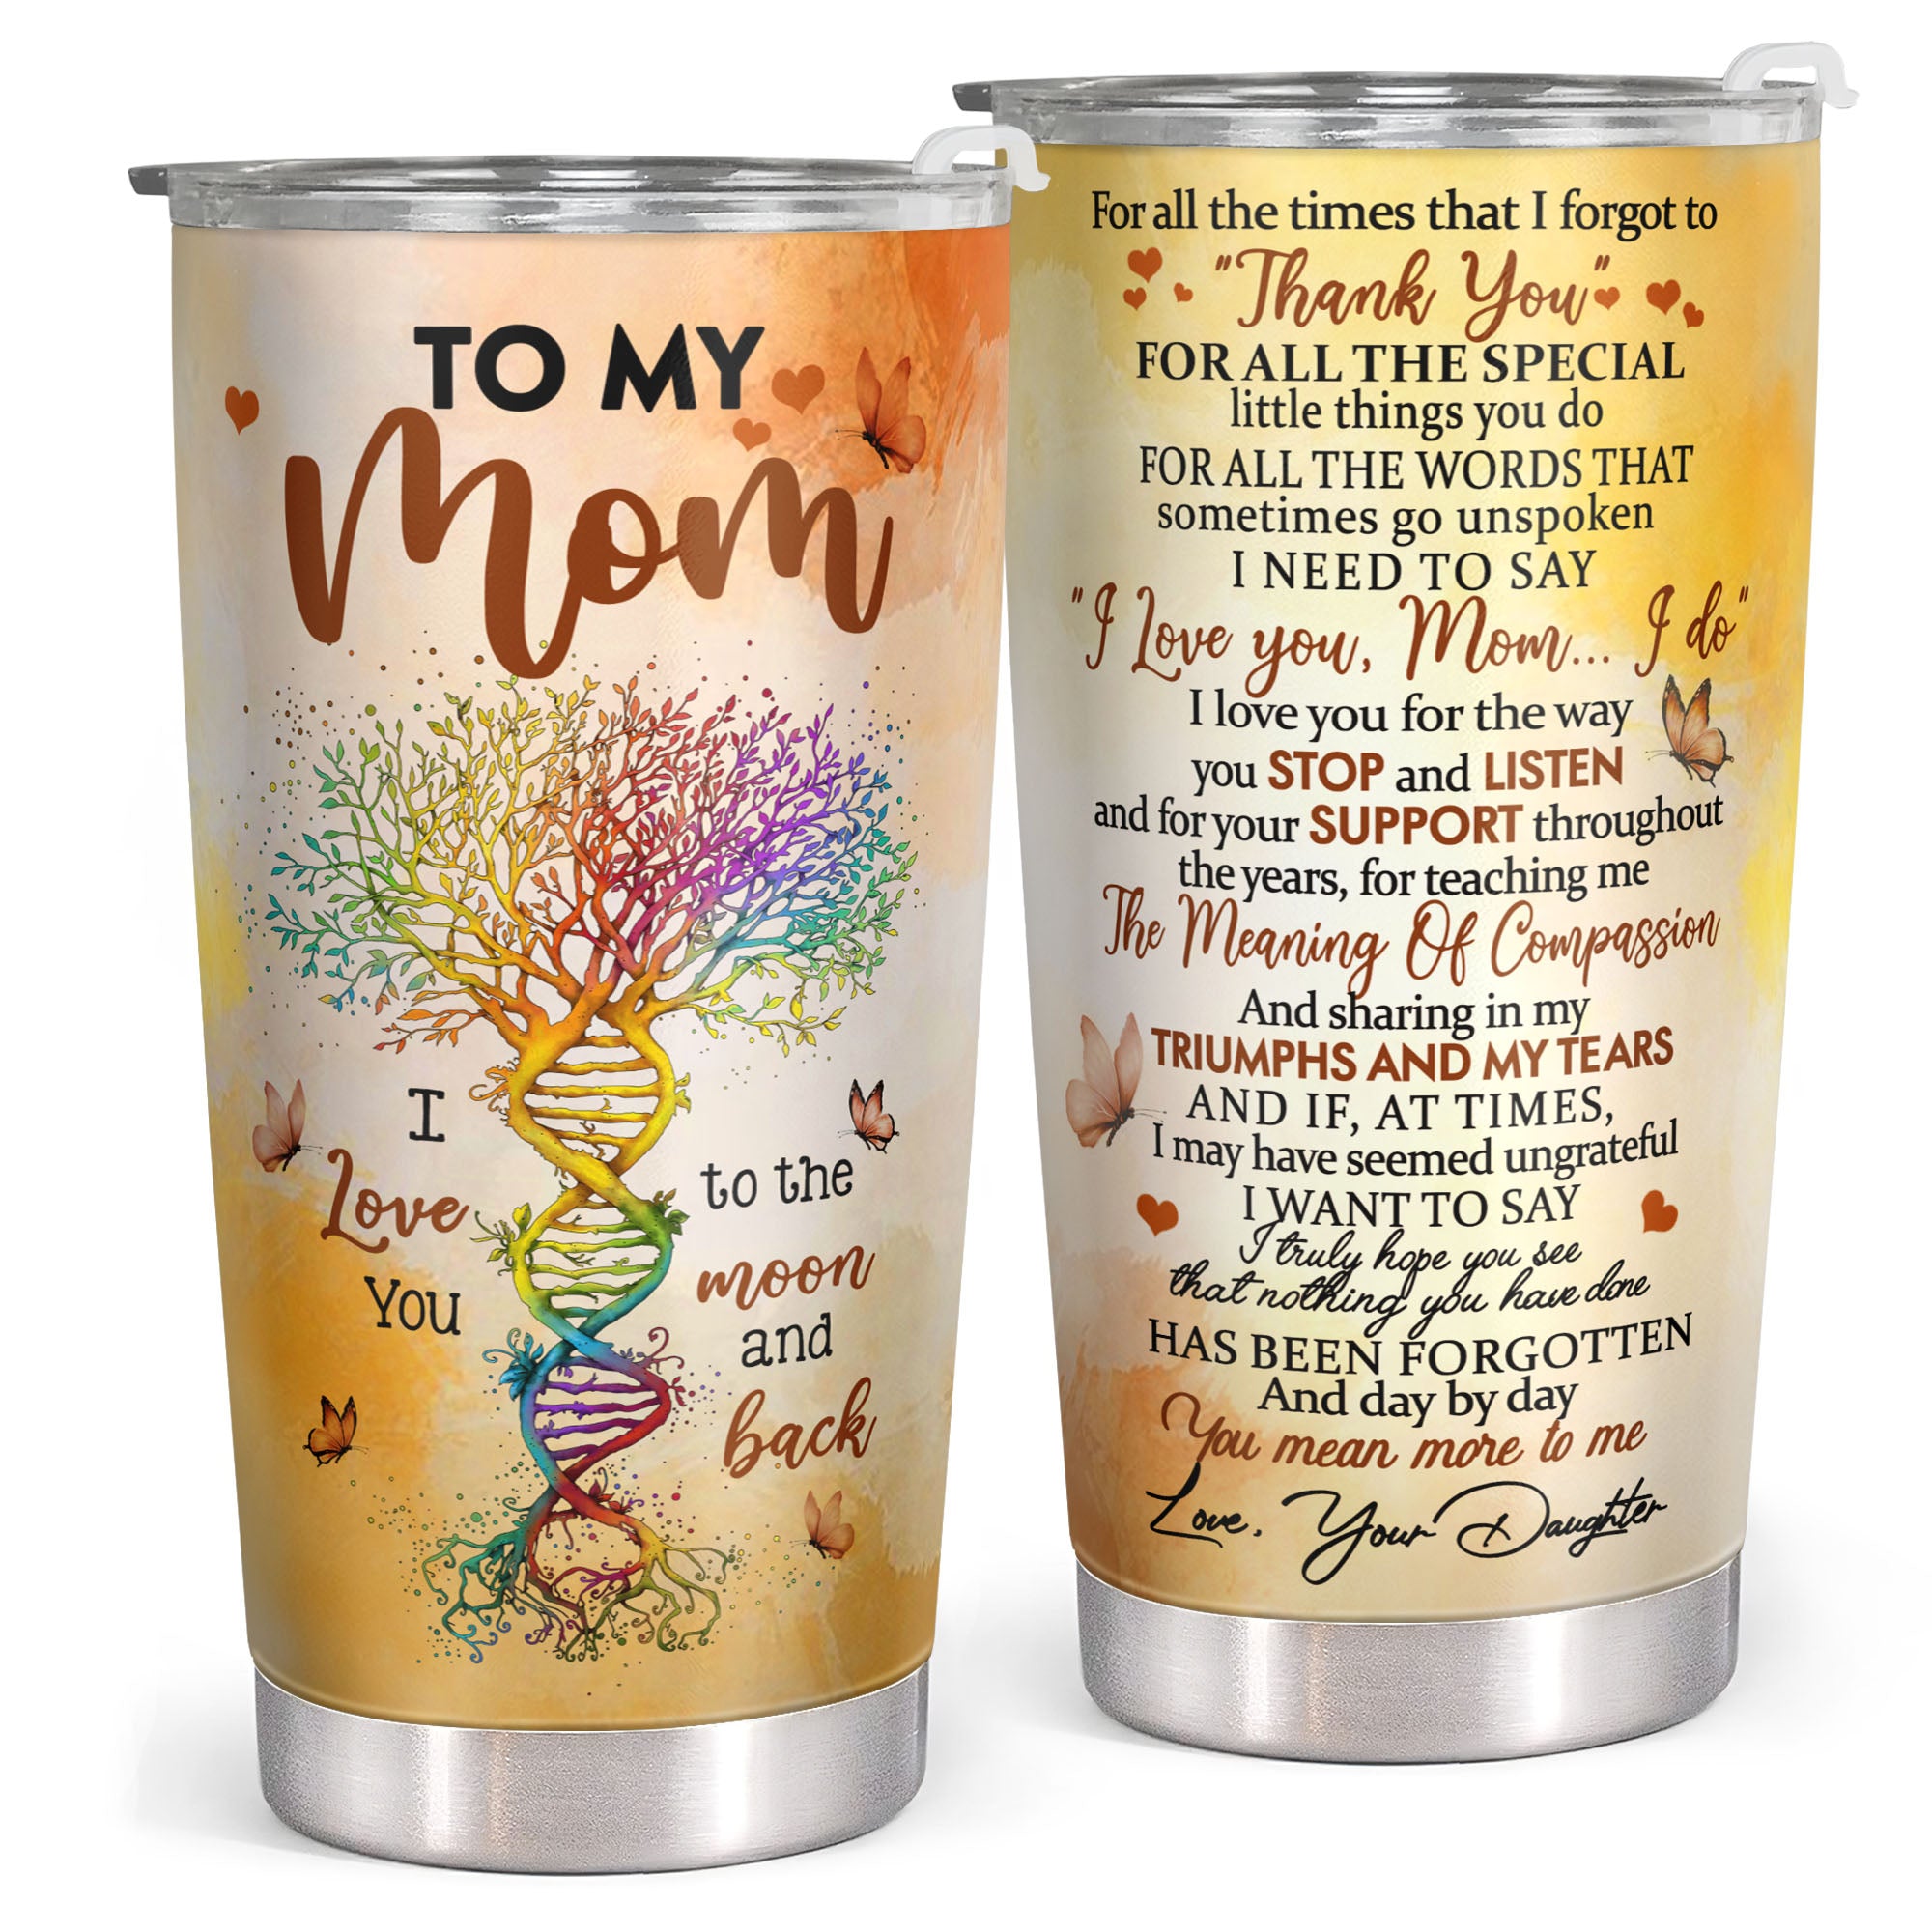  Gifts for Mom from Daughter,Son - Mom Birthday Gifts - Birthday  Gifts for Mom - Mothers Day Gifts for Mom, Mom Gifts for Step Mom,Mother in  Law,Elderly Mom - Soy Wax